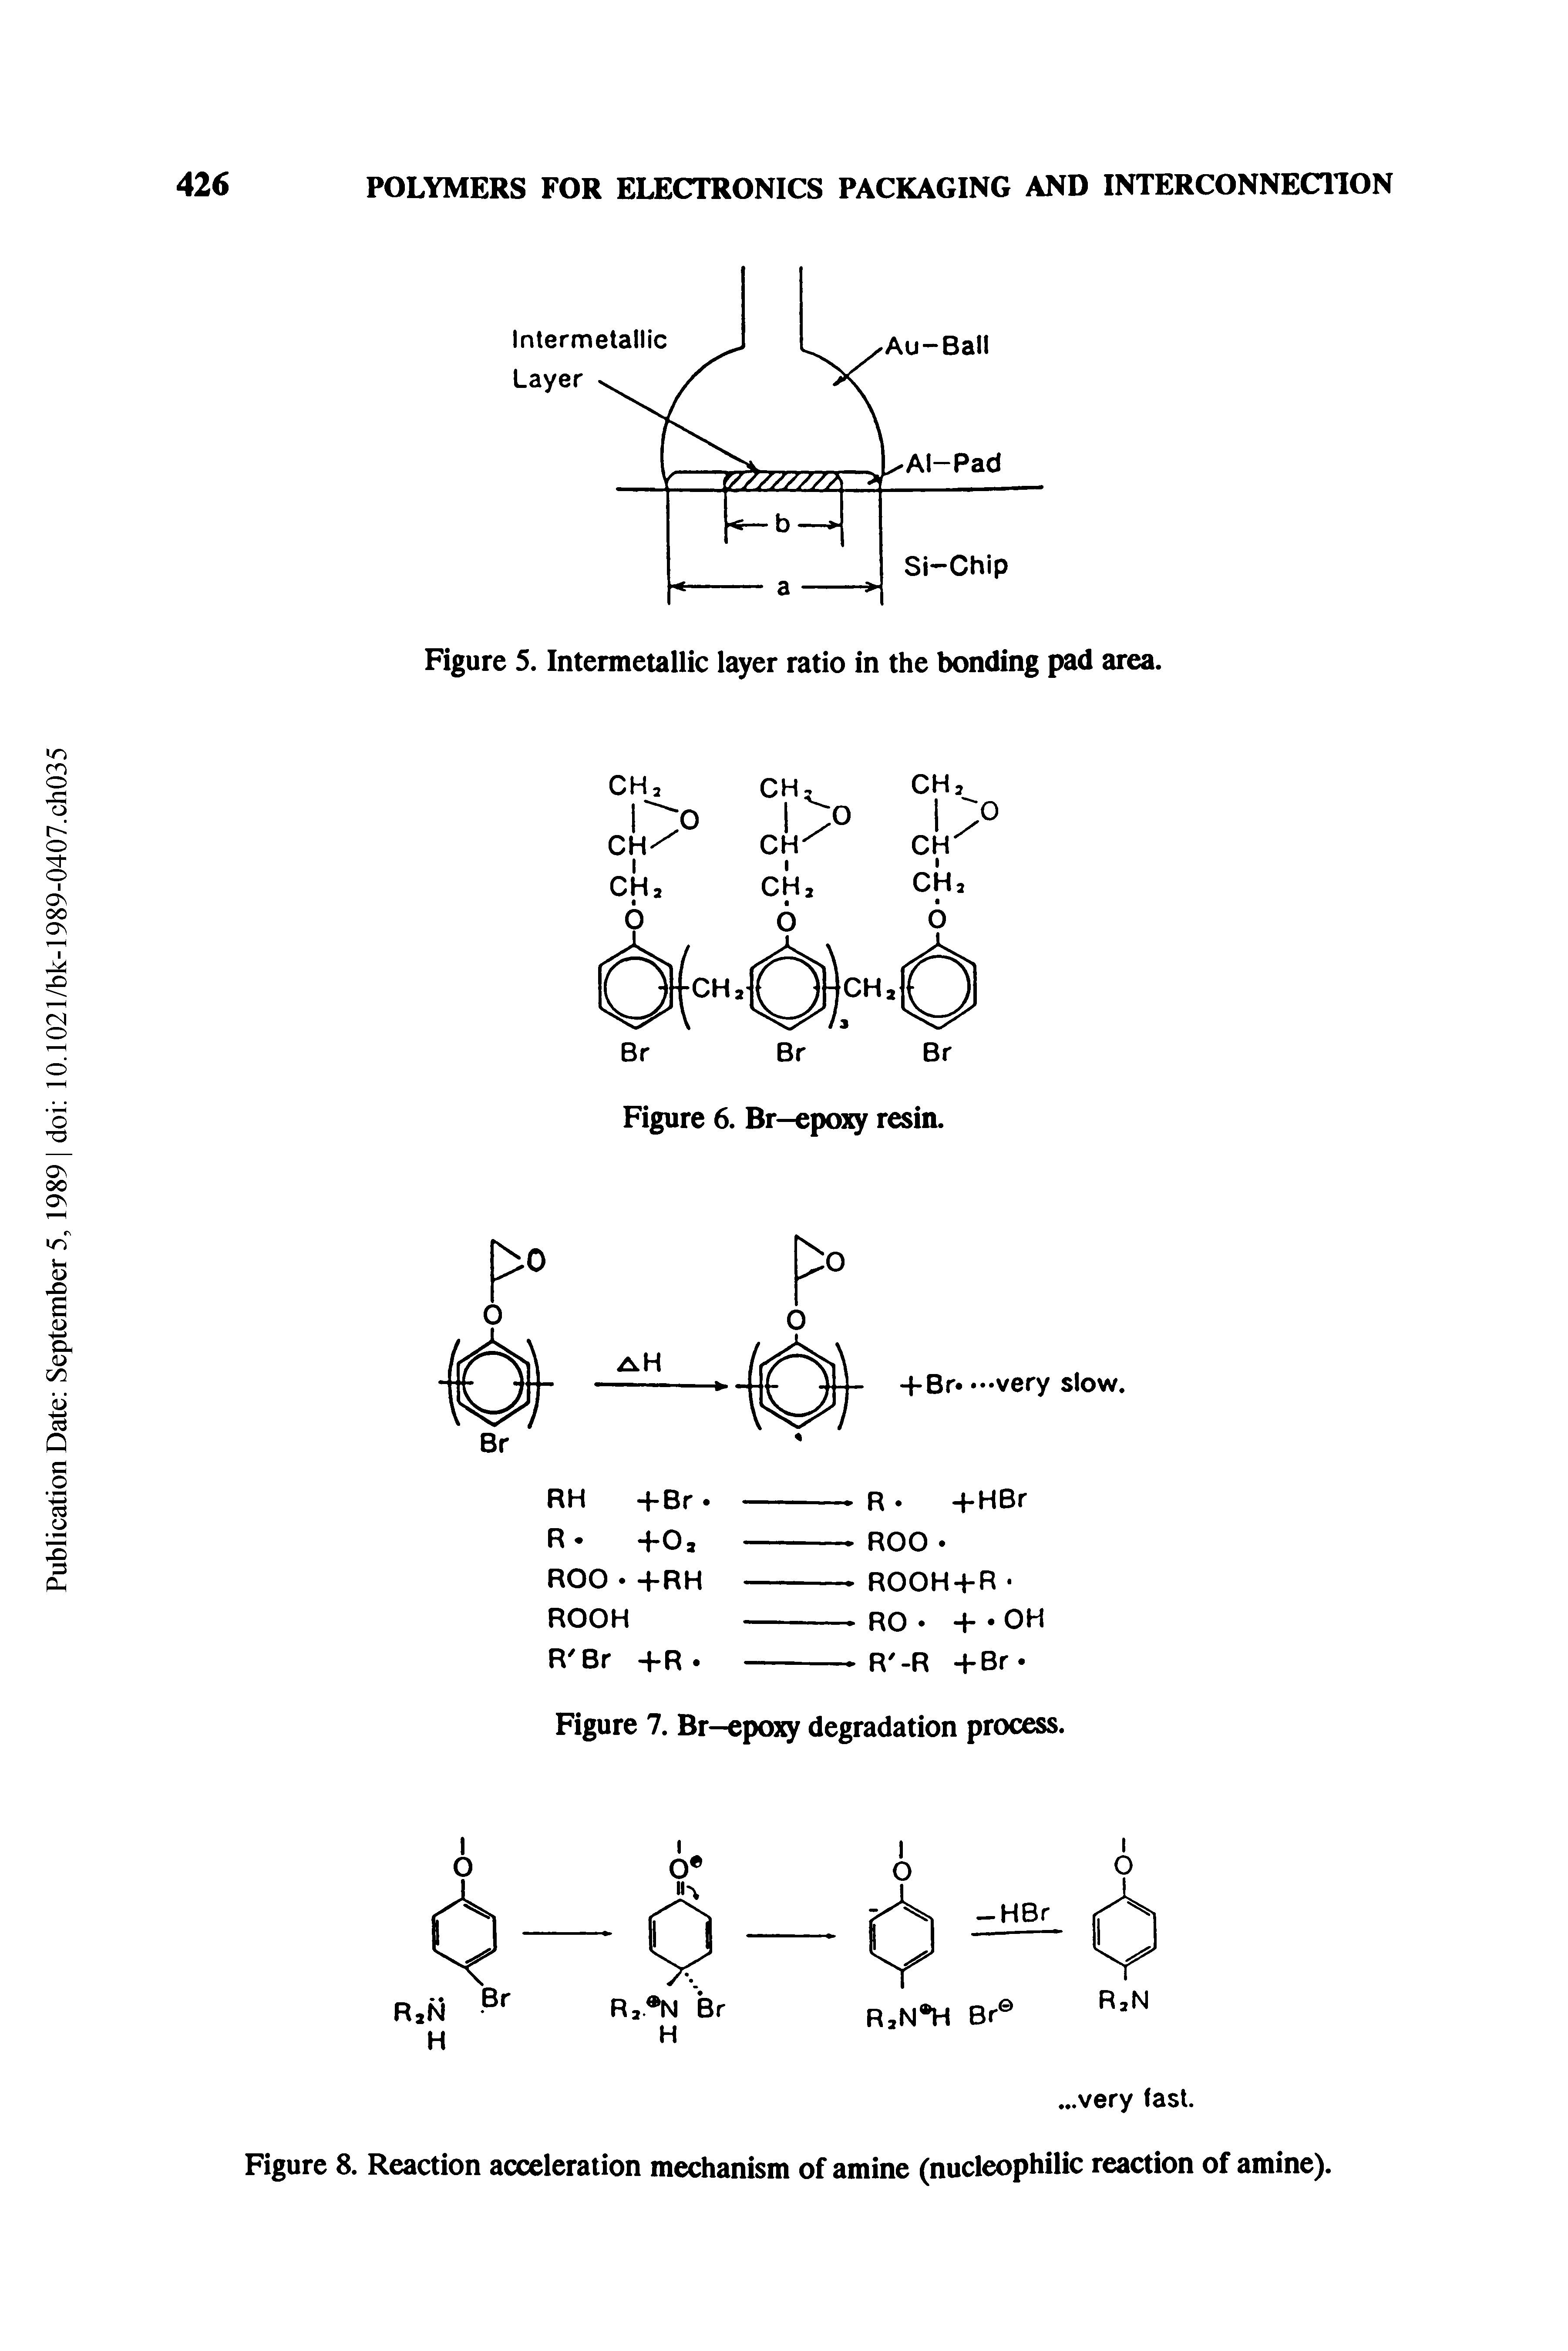 Figure 8. Reaction acceleration mechanism of amine (nucleophilic reaction of amine).